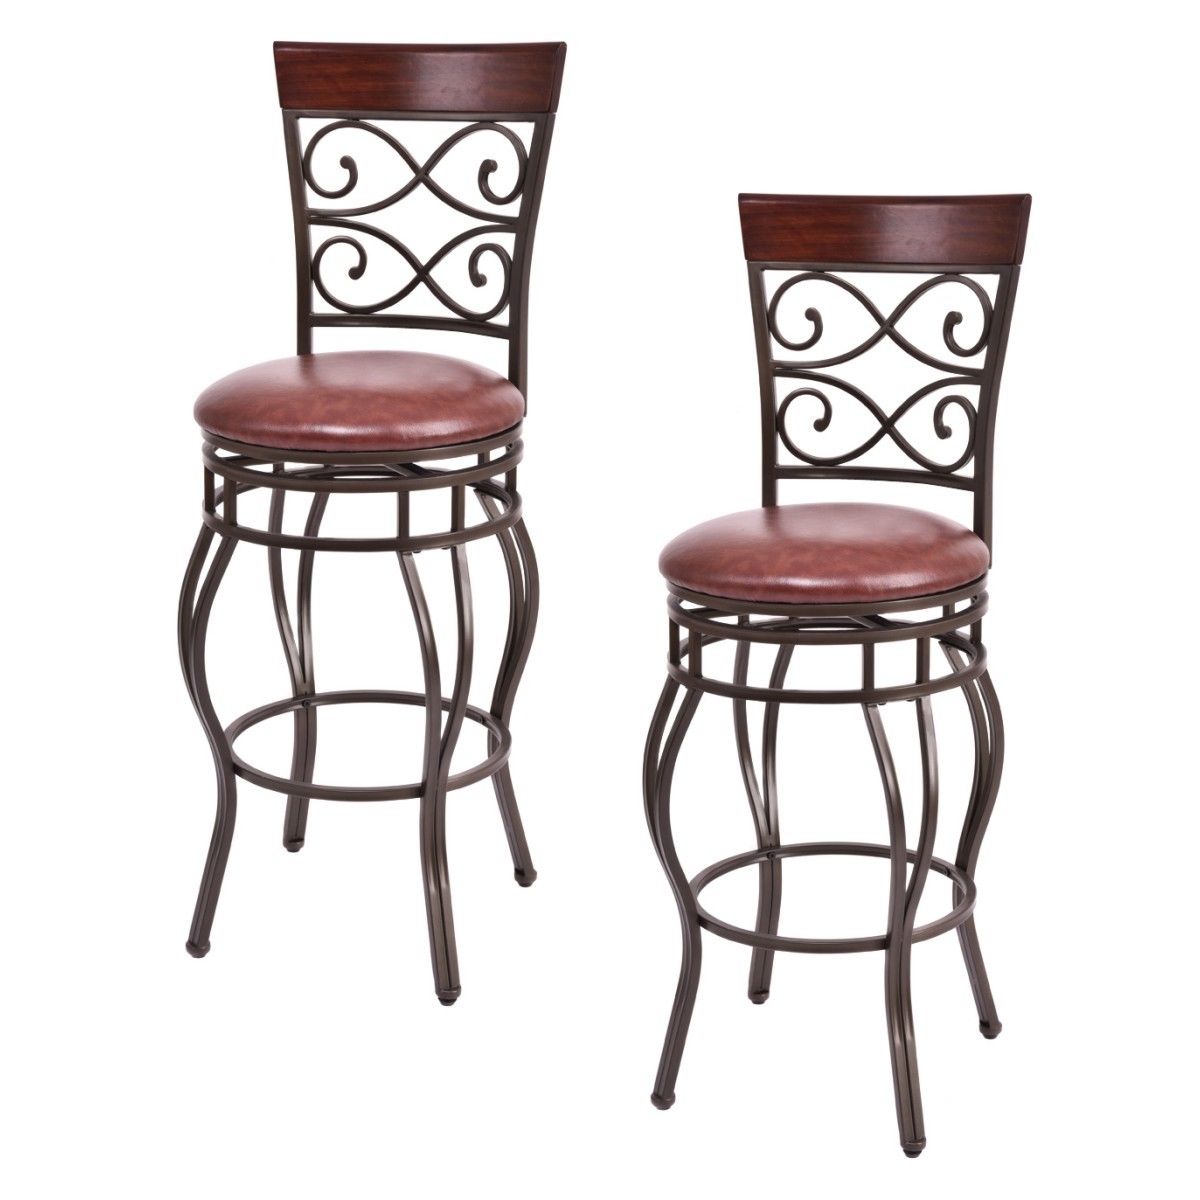 Set of 2, 30 Inch Bar Stool with Backrest and Footrest